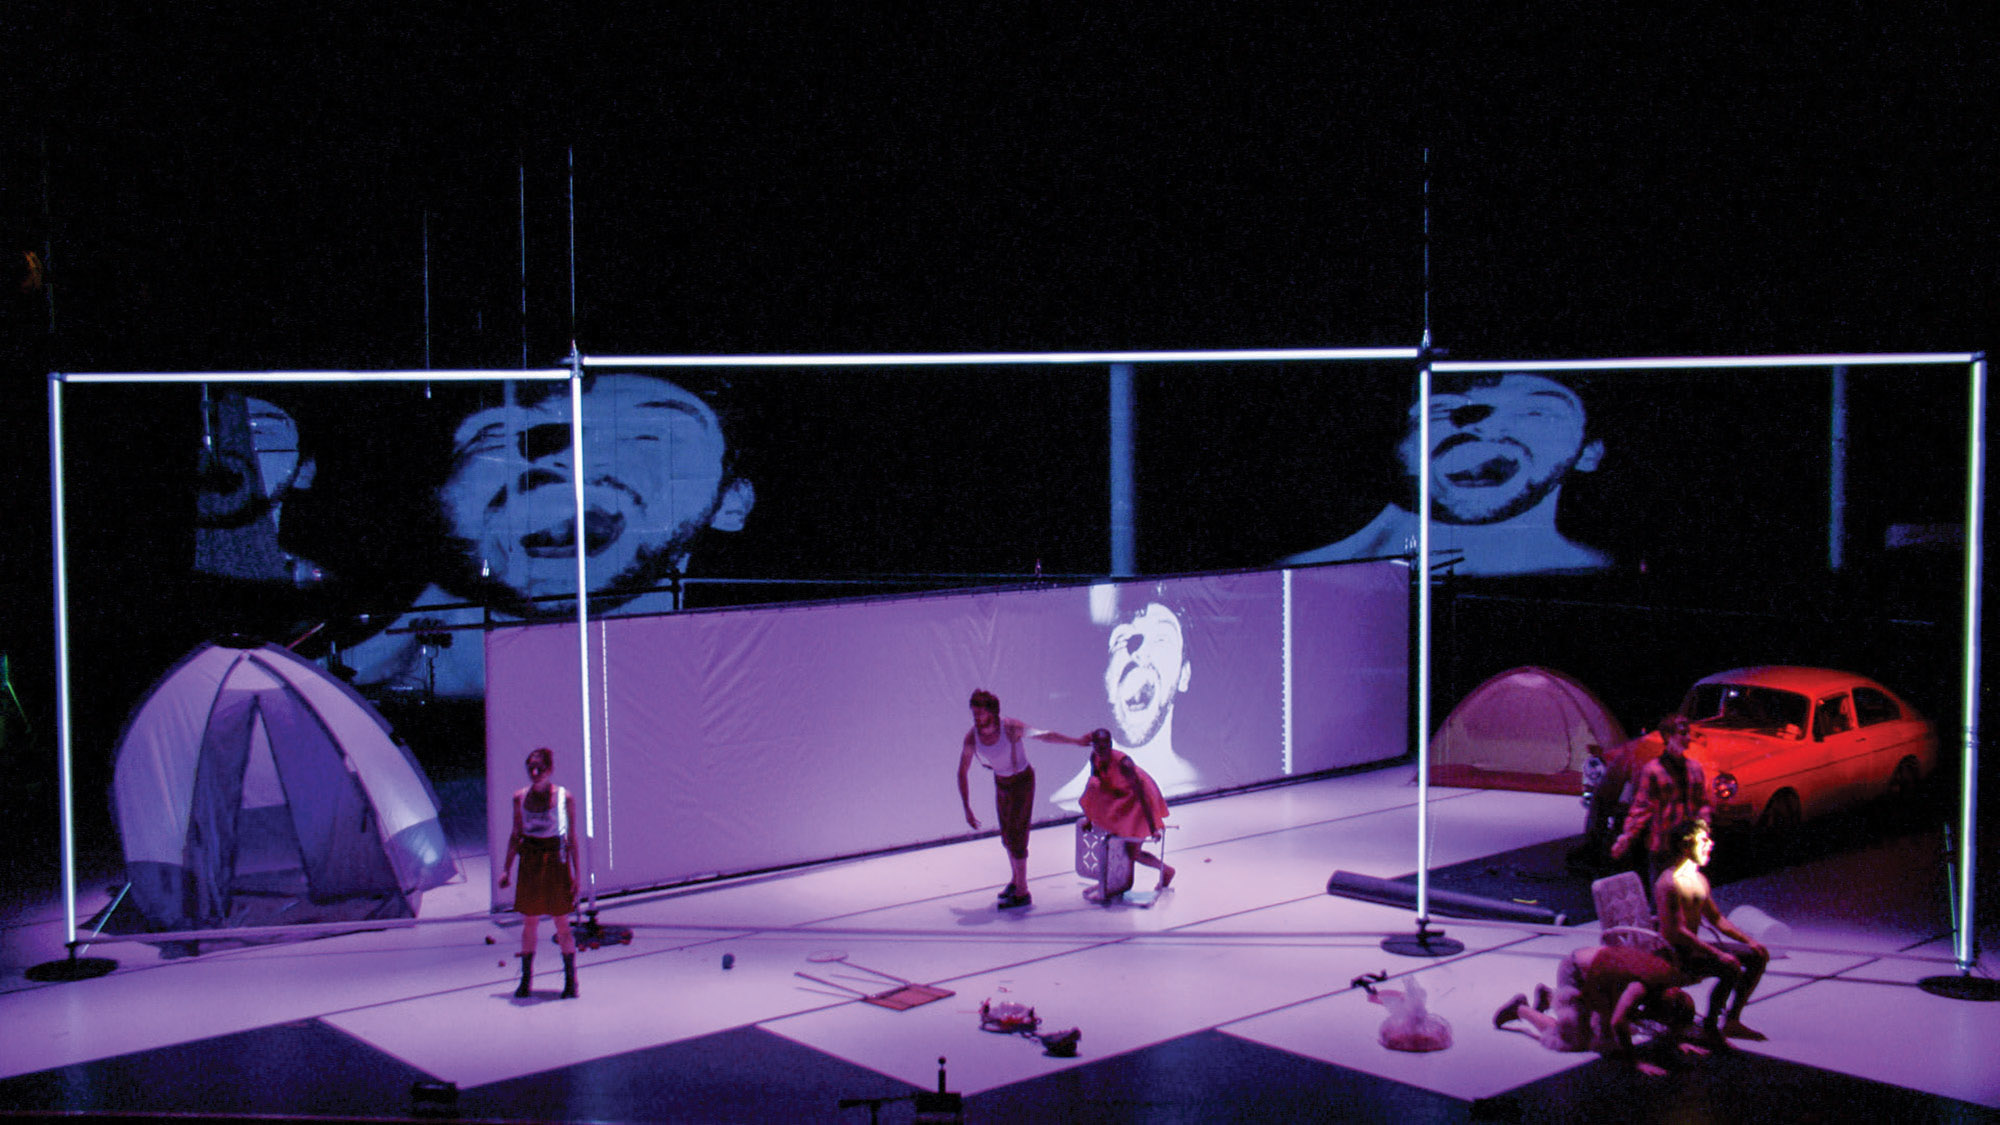 Six performers on a light purple stage with a vintage car, several tents, and other found objects.  Three performers are the front of the stage, one screaming theatrically. Two performers are behind them walking hunched towards the sixth performer.